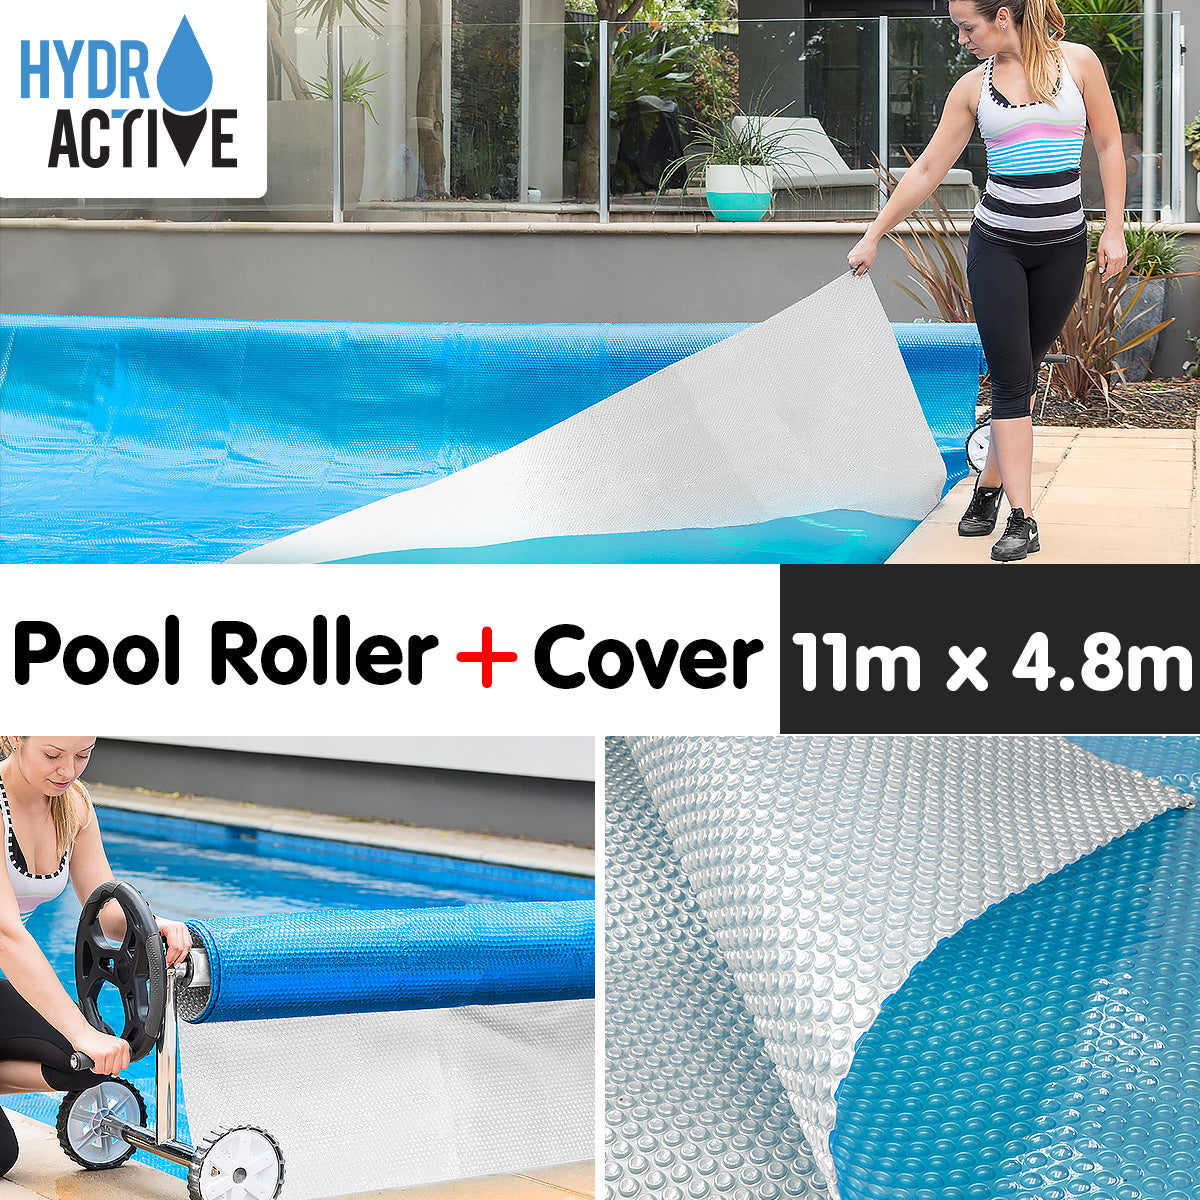 500micron Swimming Pool Roller Cover Combo - Silver/Blue - 11m x 4.8m